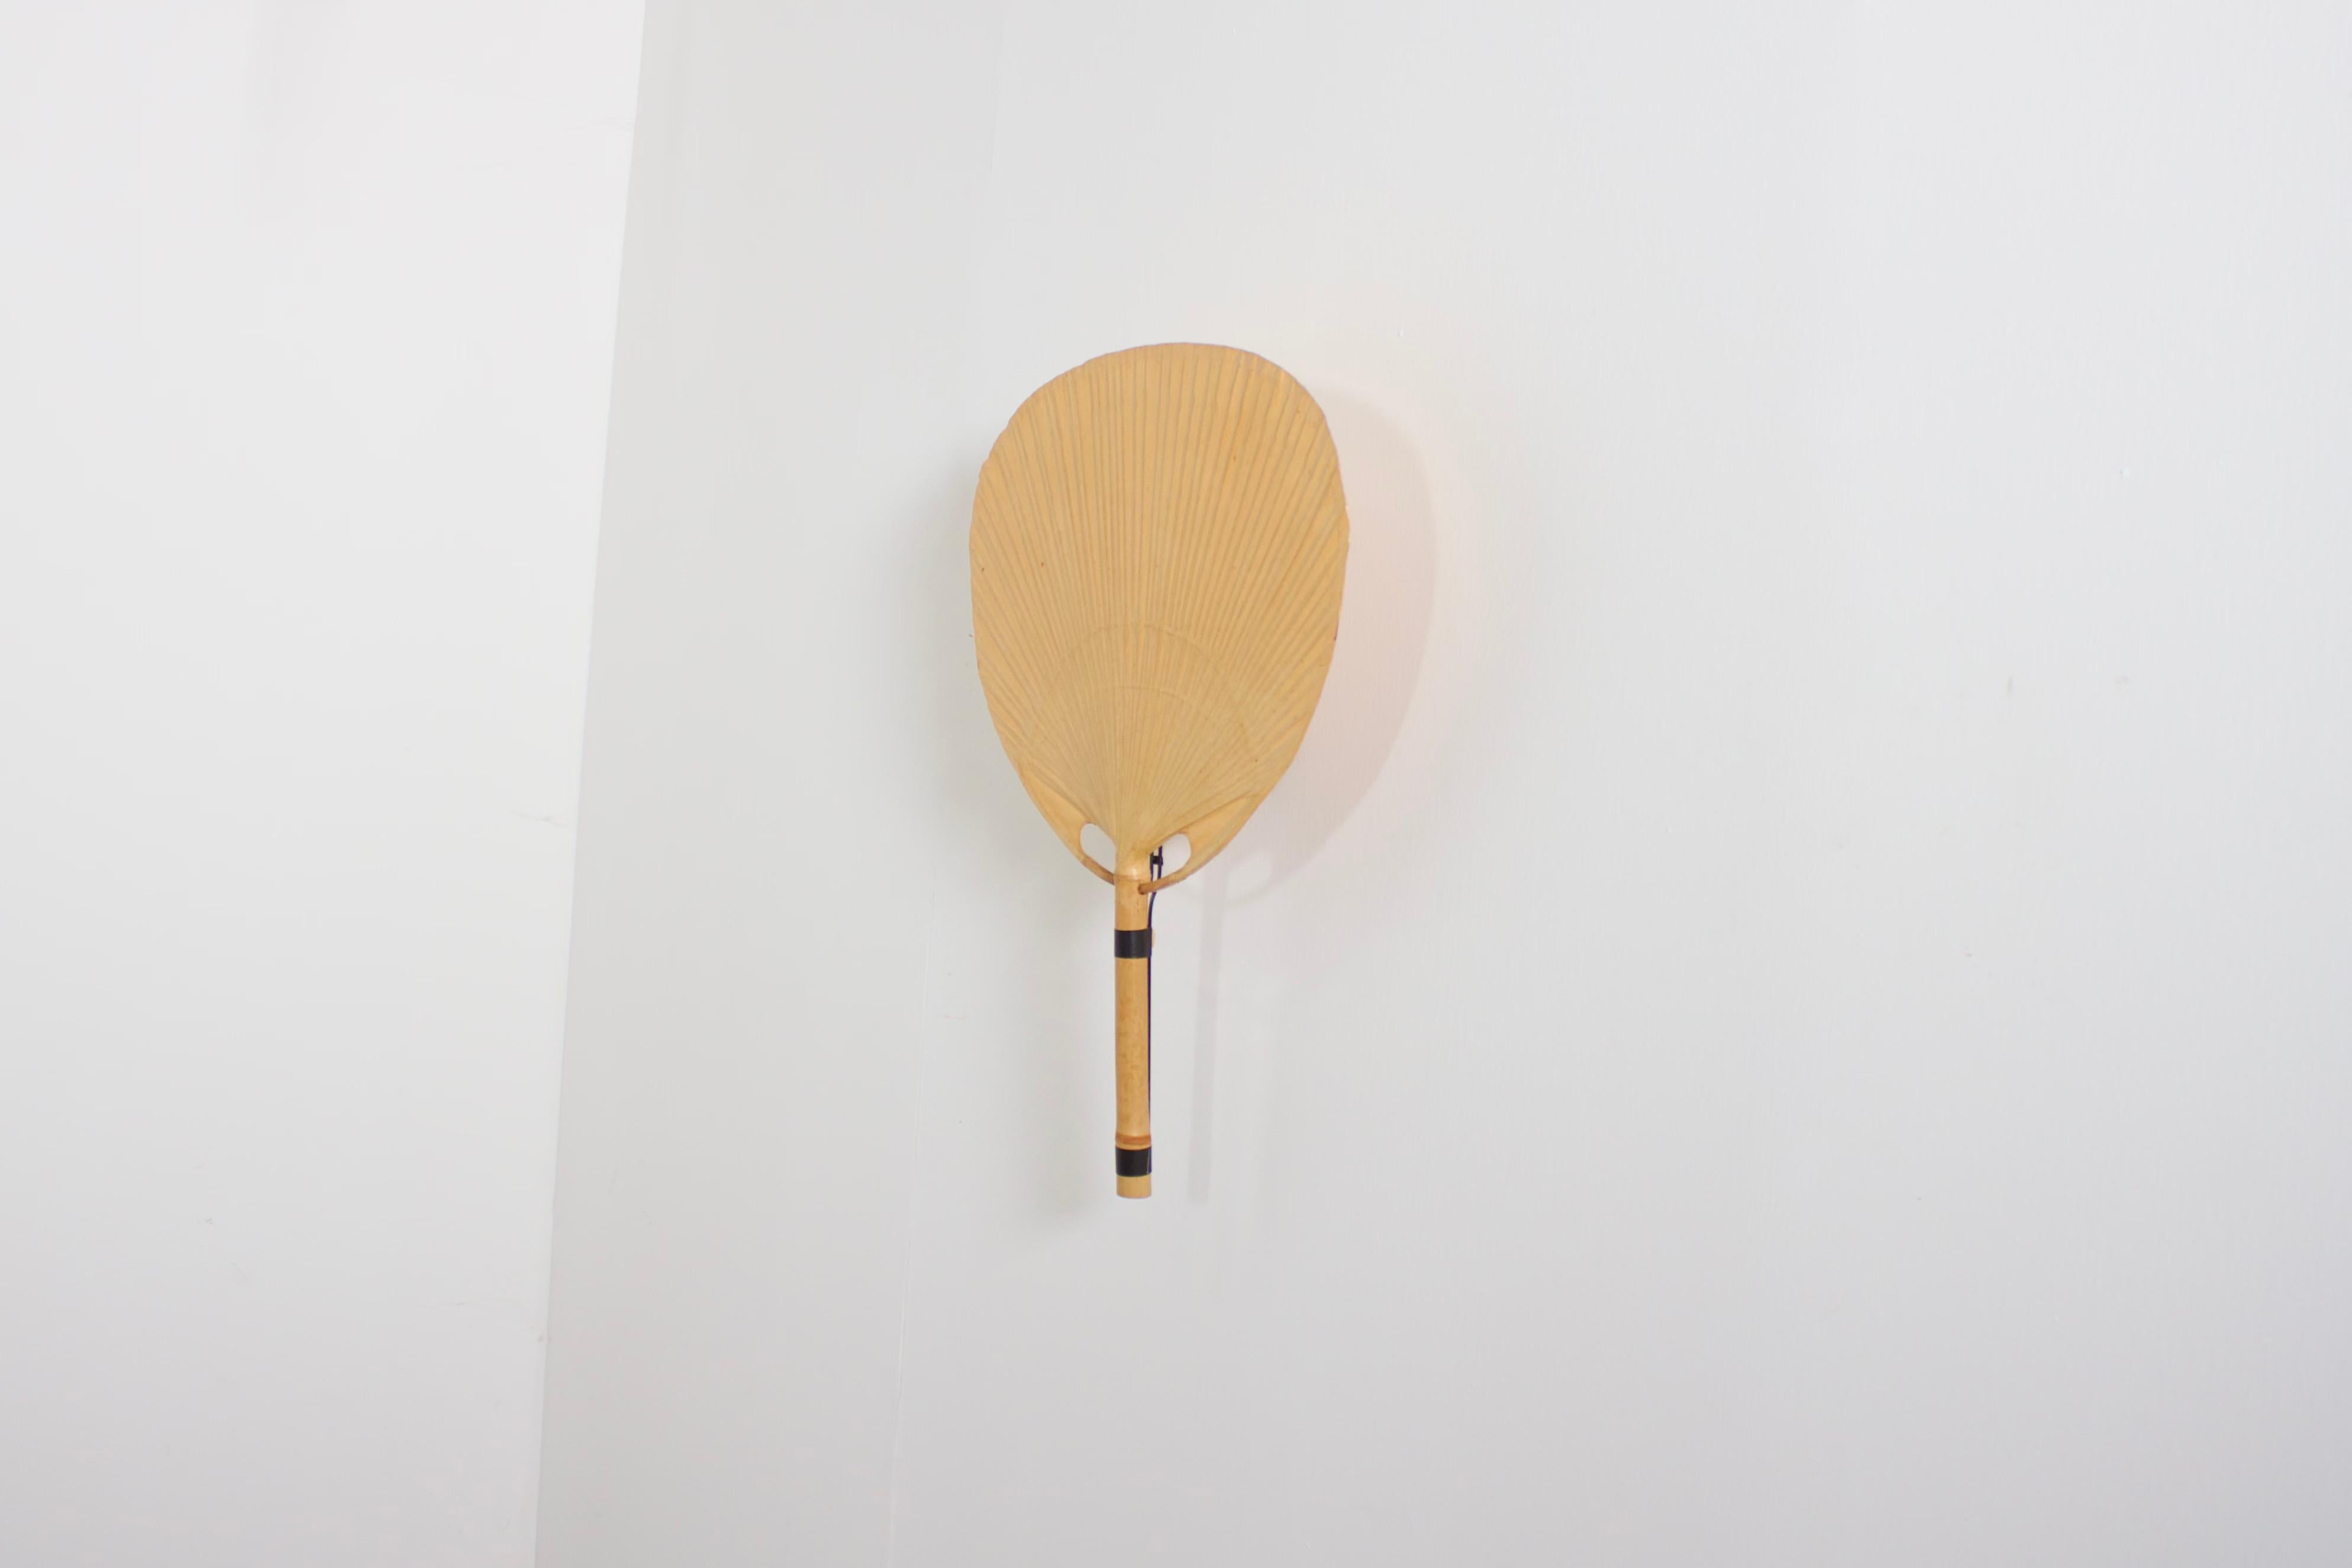 Uchiwa fan wall lamp by Ingo Maurer in very good condition. 

Designed by Ingo Maurer for M design, Germany. 

This lamp was handmade in 1977 from bamboo, wicker and Japanese rice paper. 

It is very fragile and therefor very hard to find in good